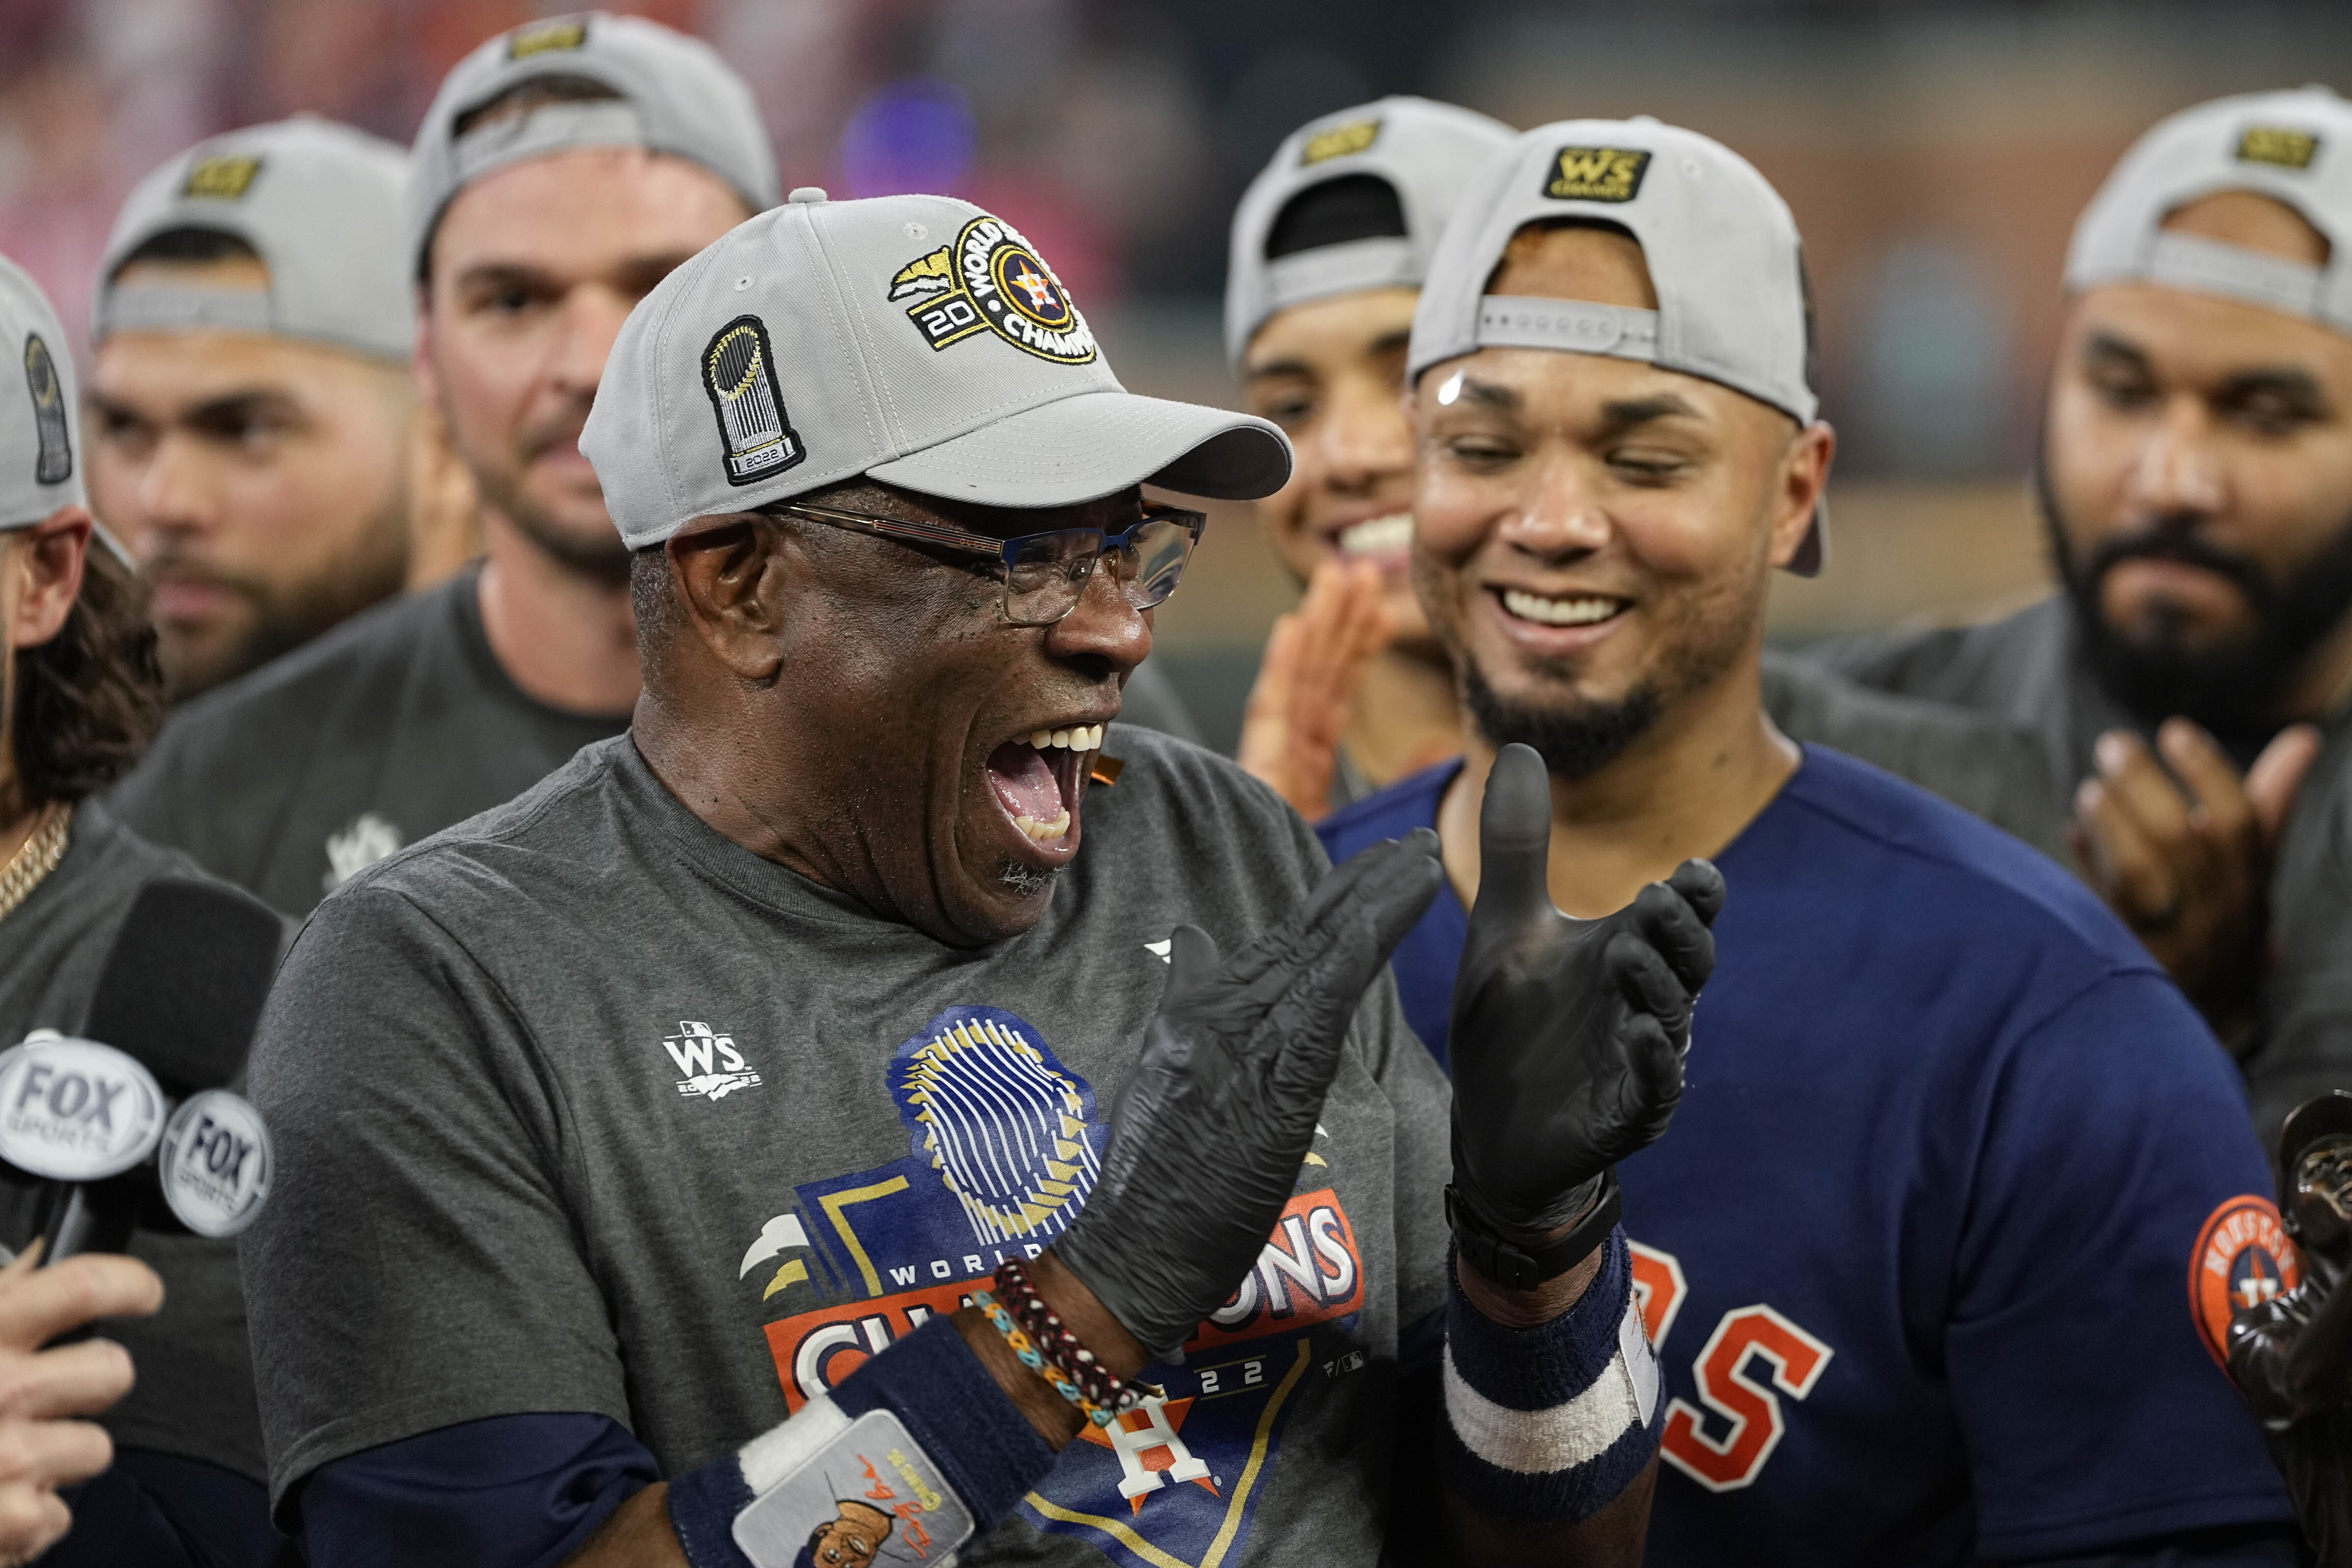 Dusty Baker drinks champagne from a shoe to celebrate Astros' win